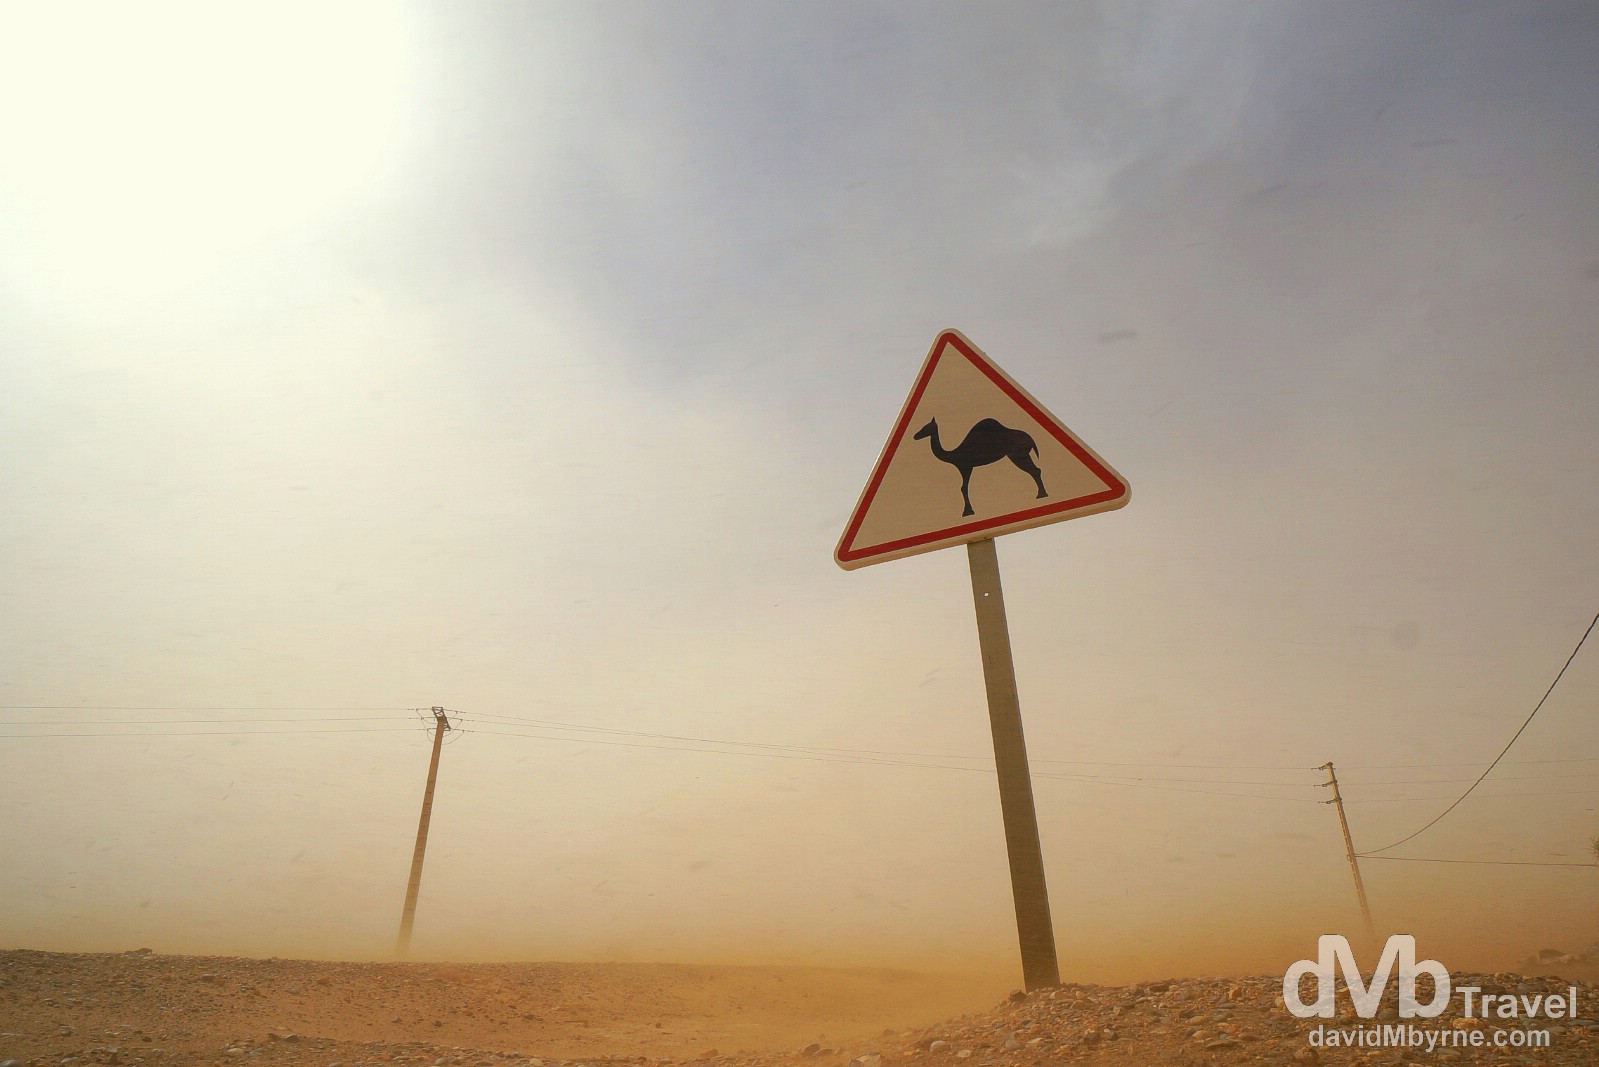 Sandstorm outside the village of Merzouga, Morocco. May 20th, 2014.